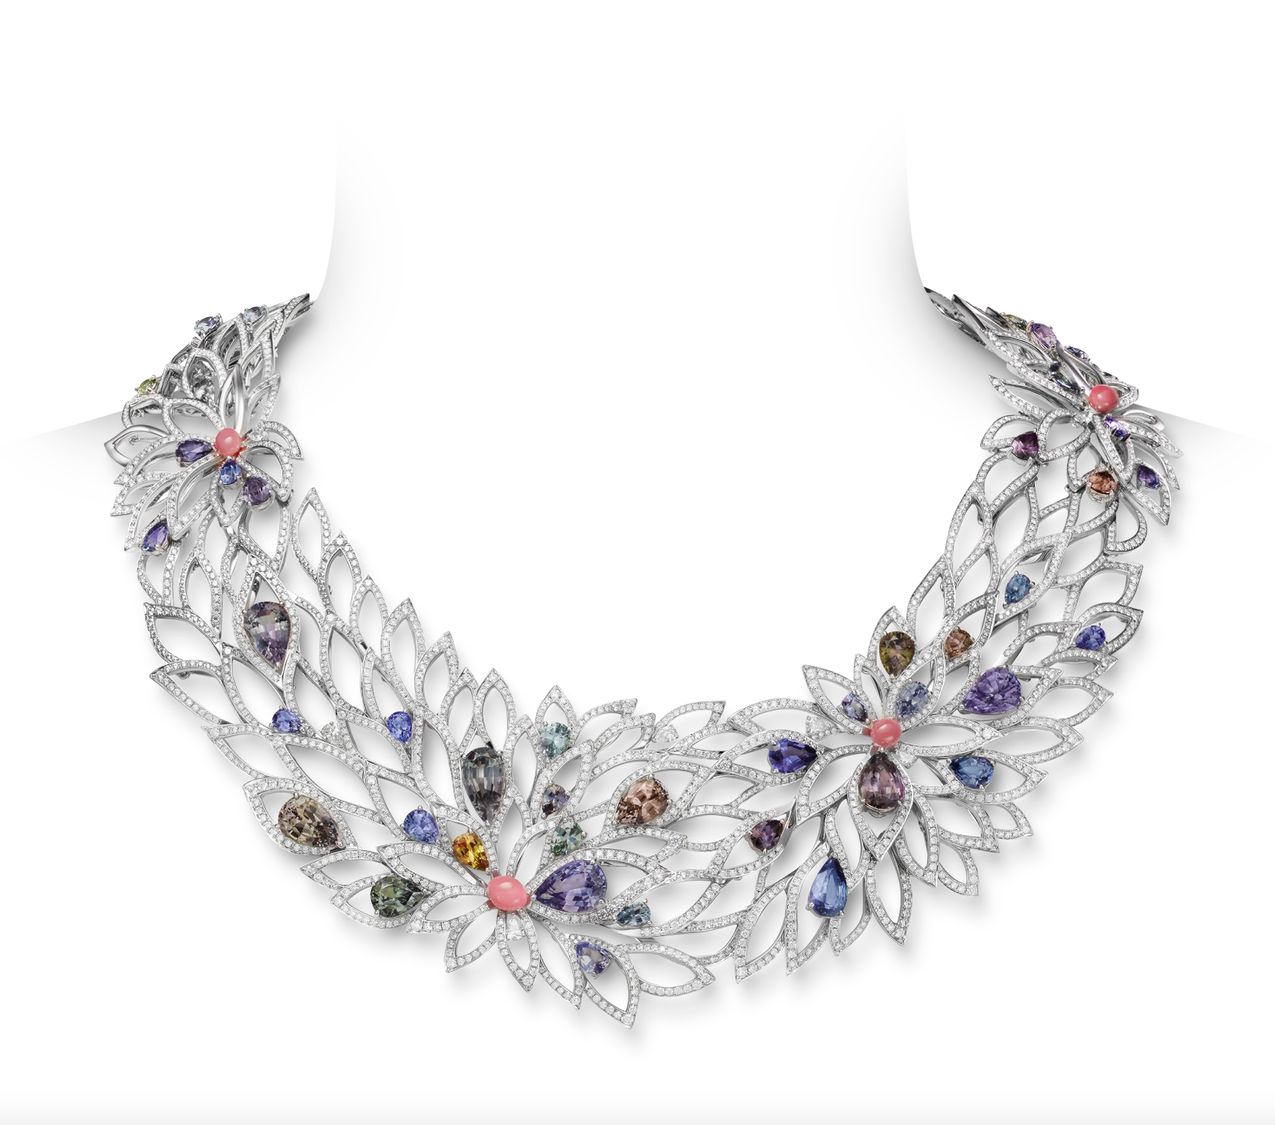 Chaumet's New High Jewellery Collection is Inspired by Nature